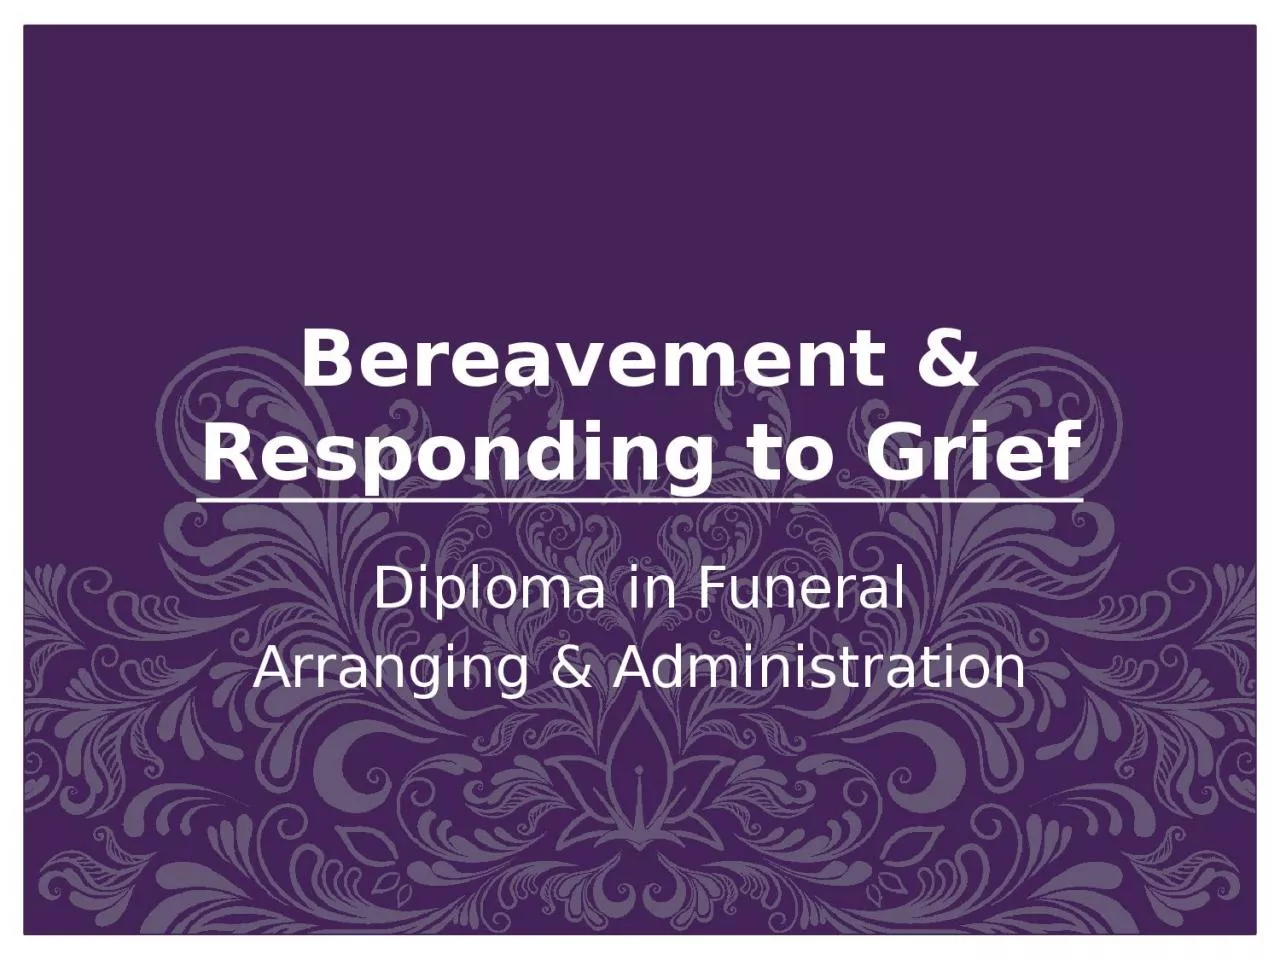 Bereavement & Responding to Grief